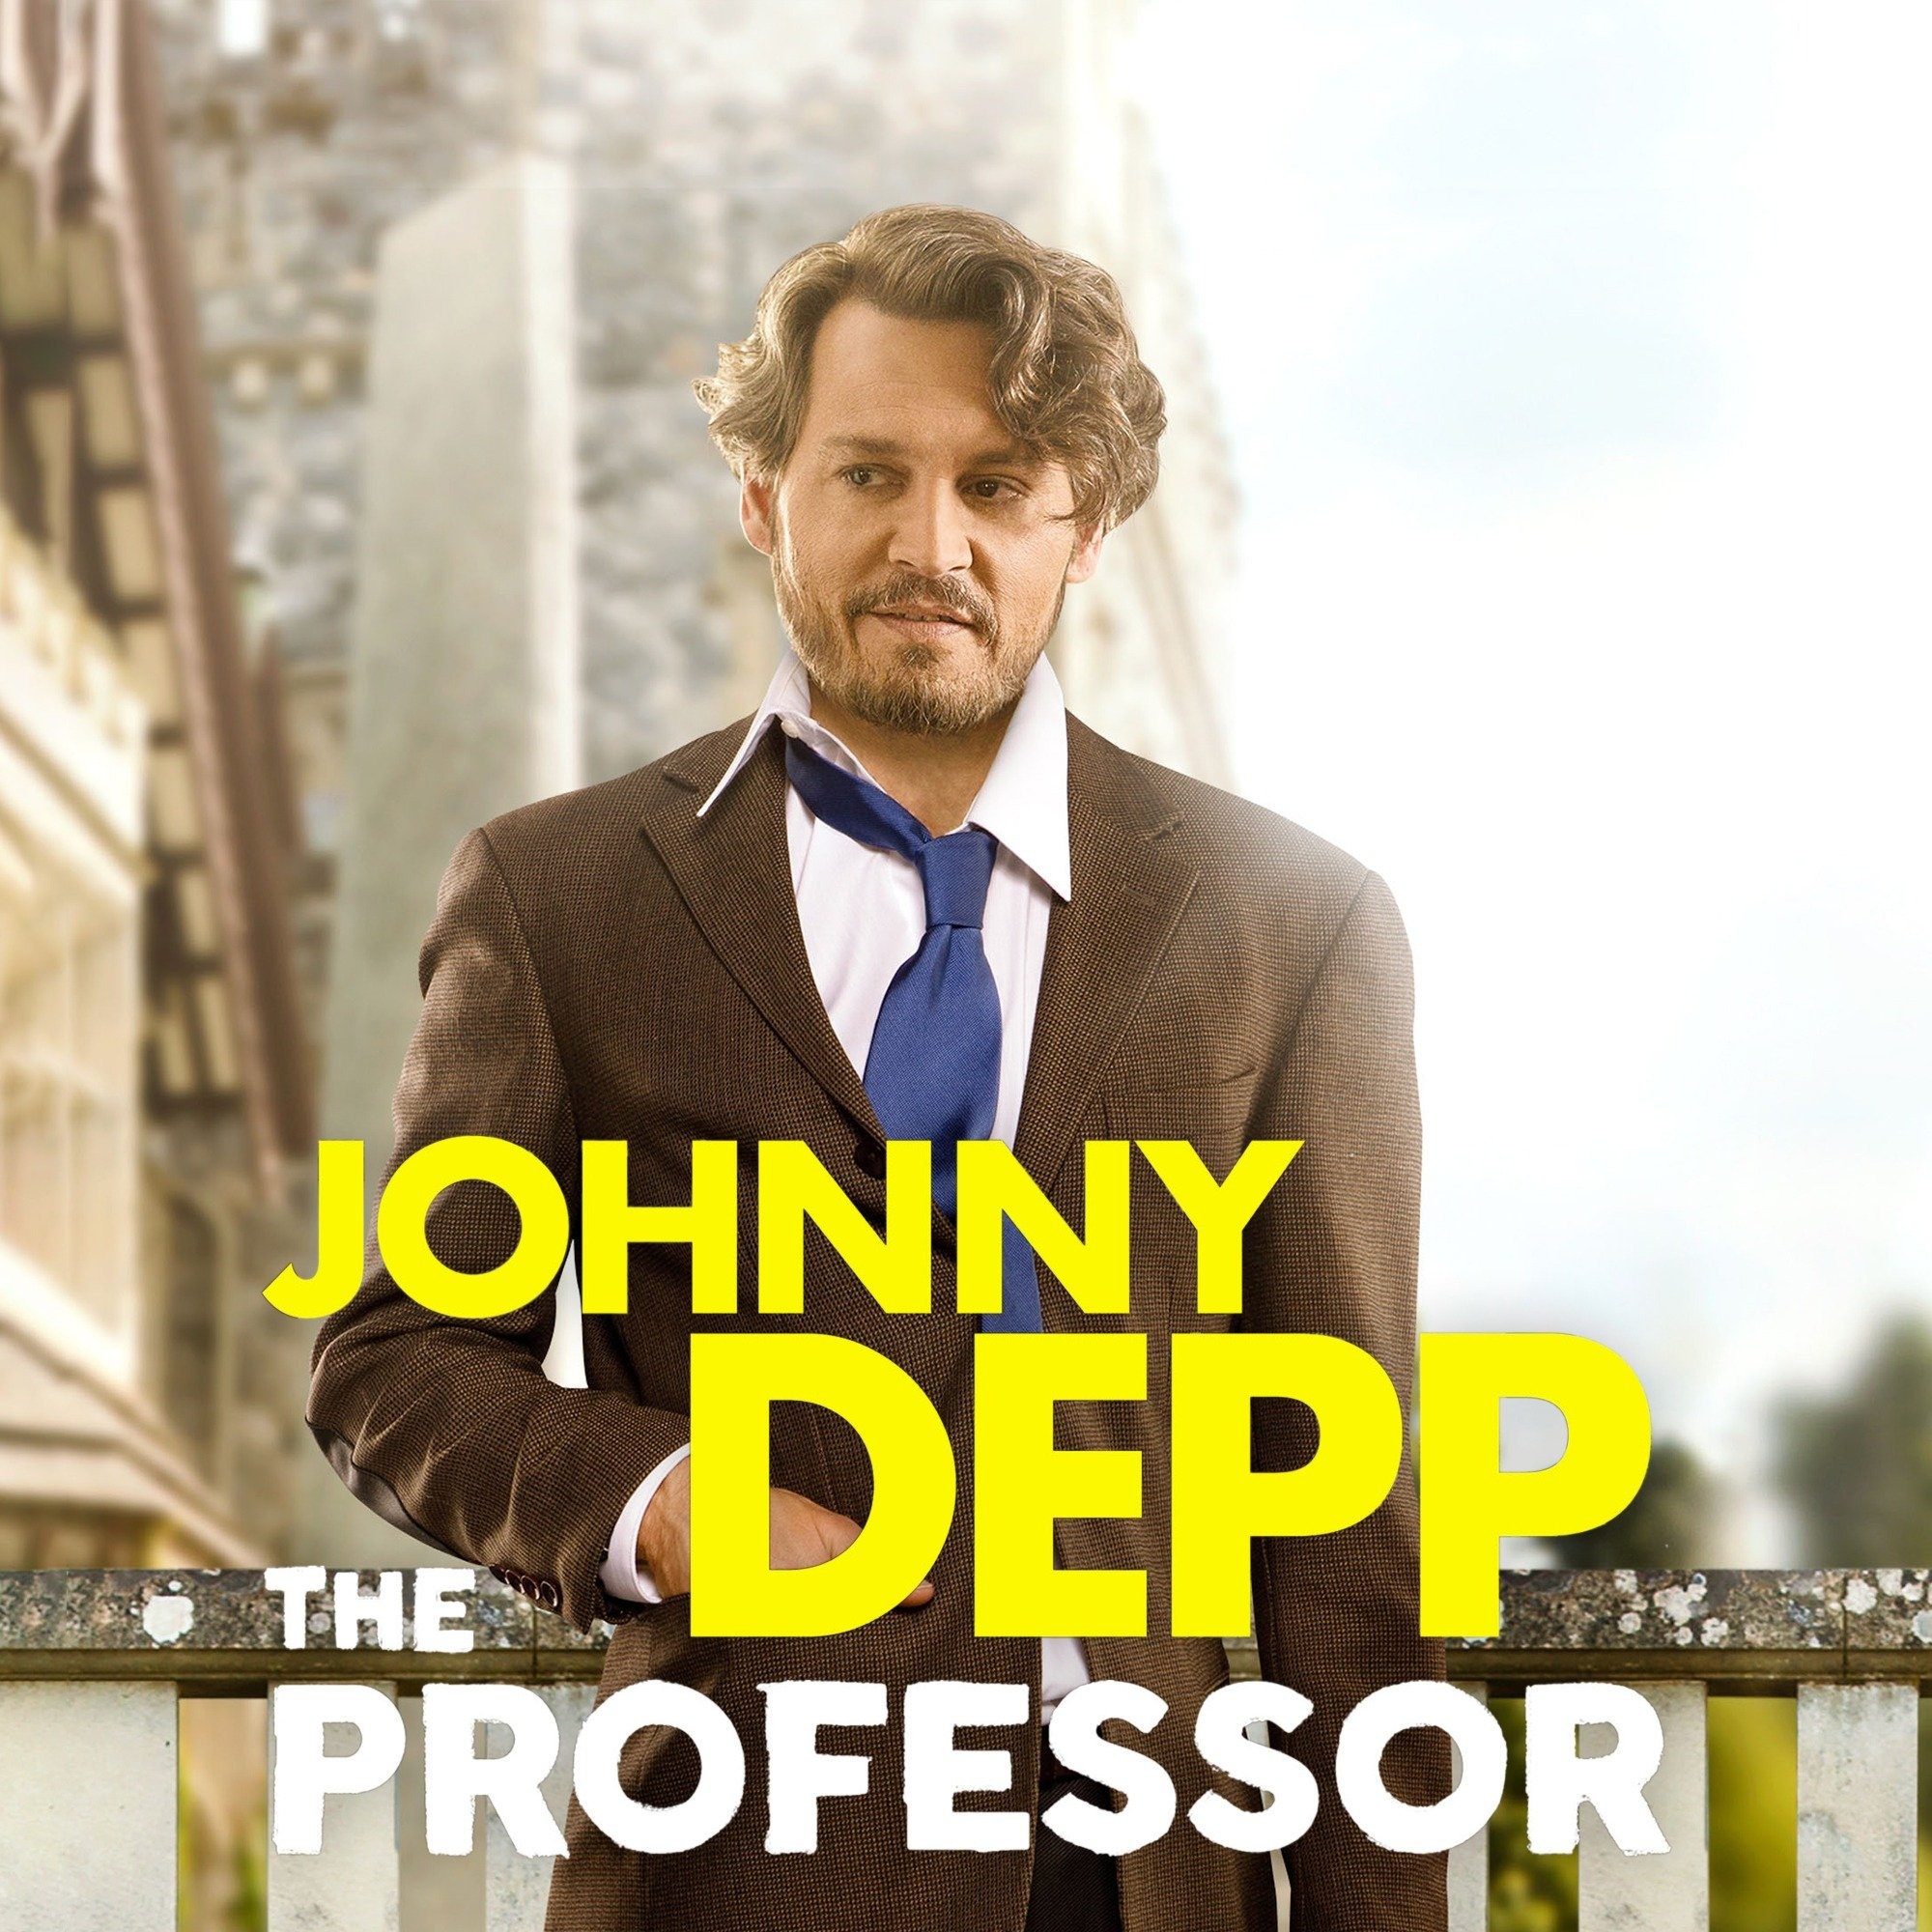 The Professor, Full movie online, Compelling narrative, Thought-provoking ending, 2000x2000 HD Phone